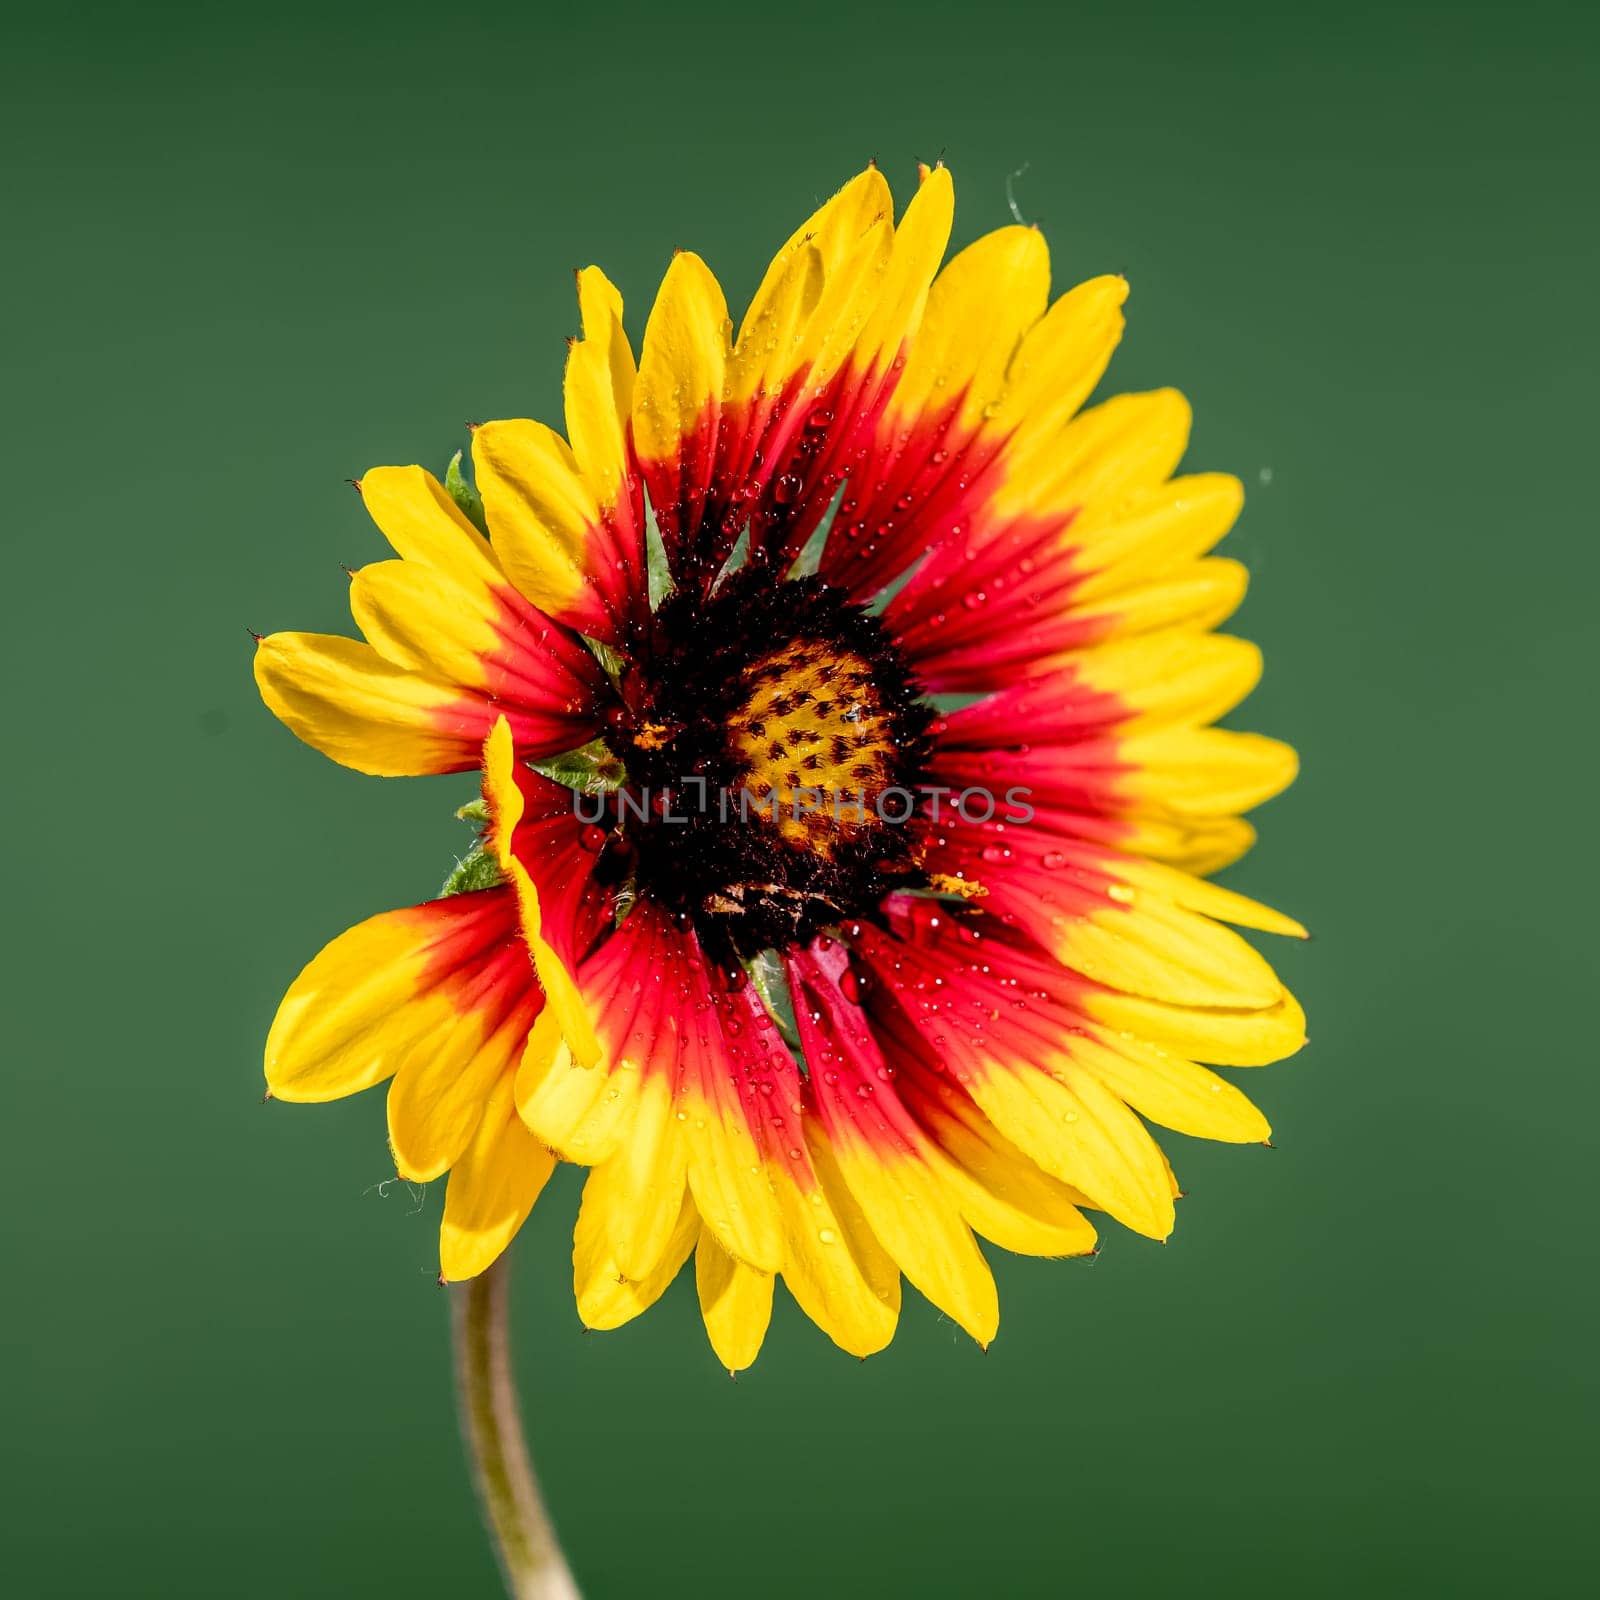 Blooming red Gaillardia on a green background by Multipedia